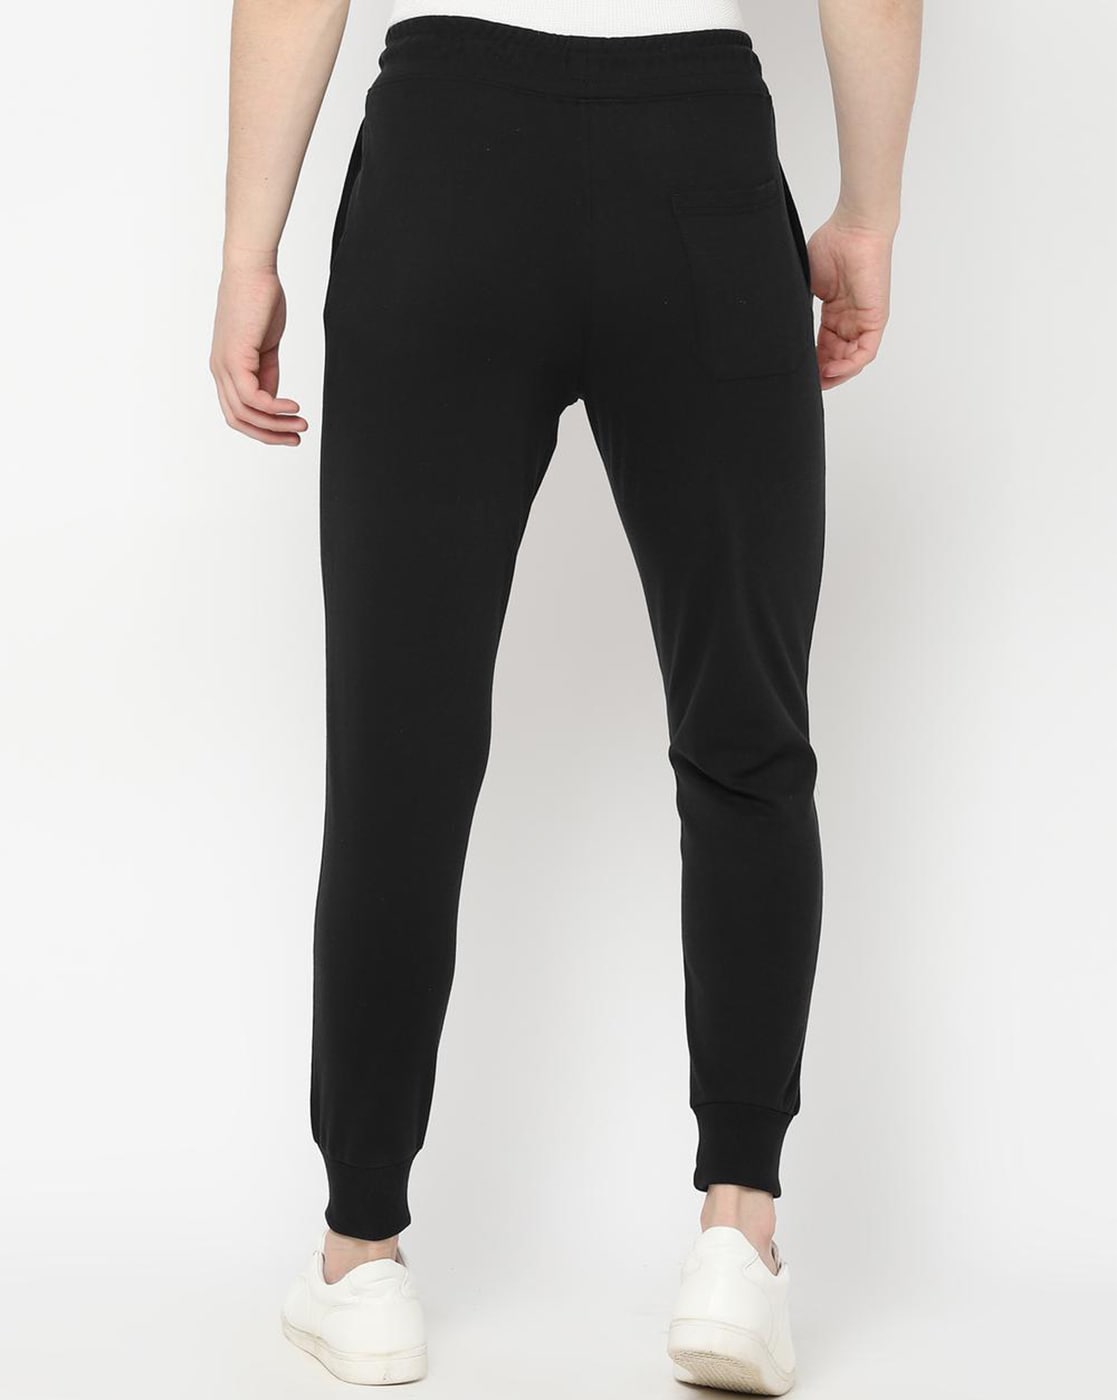 Athletic Pant Skult in Patna - Dealers, Manufacturers & Suppliers - Justdial